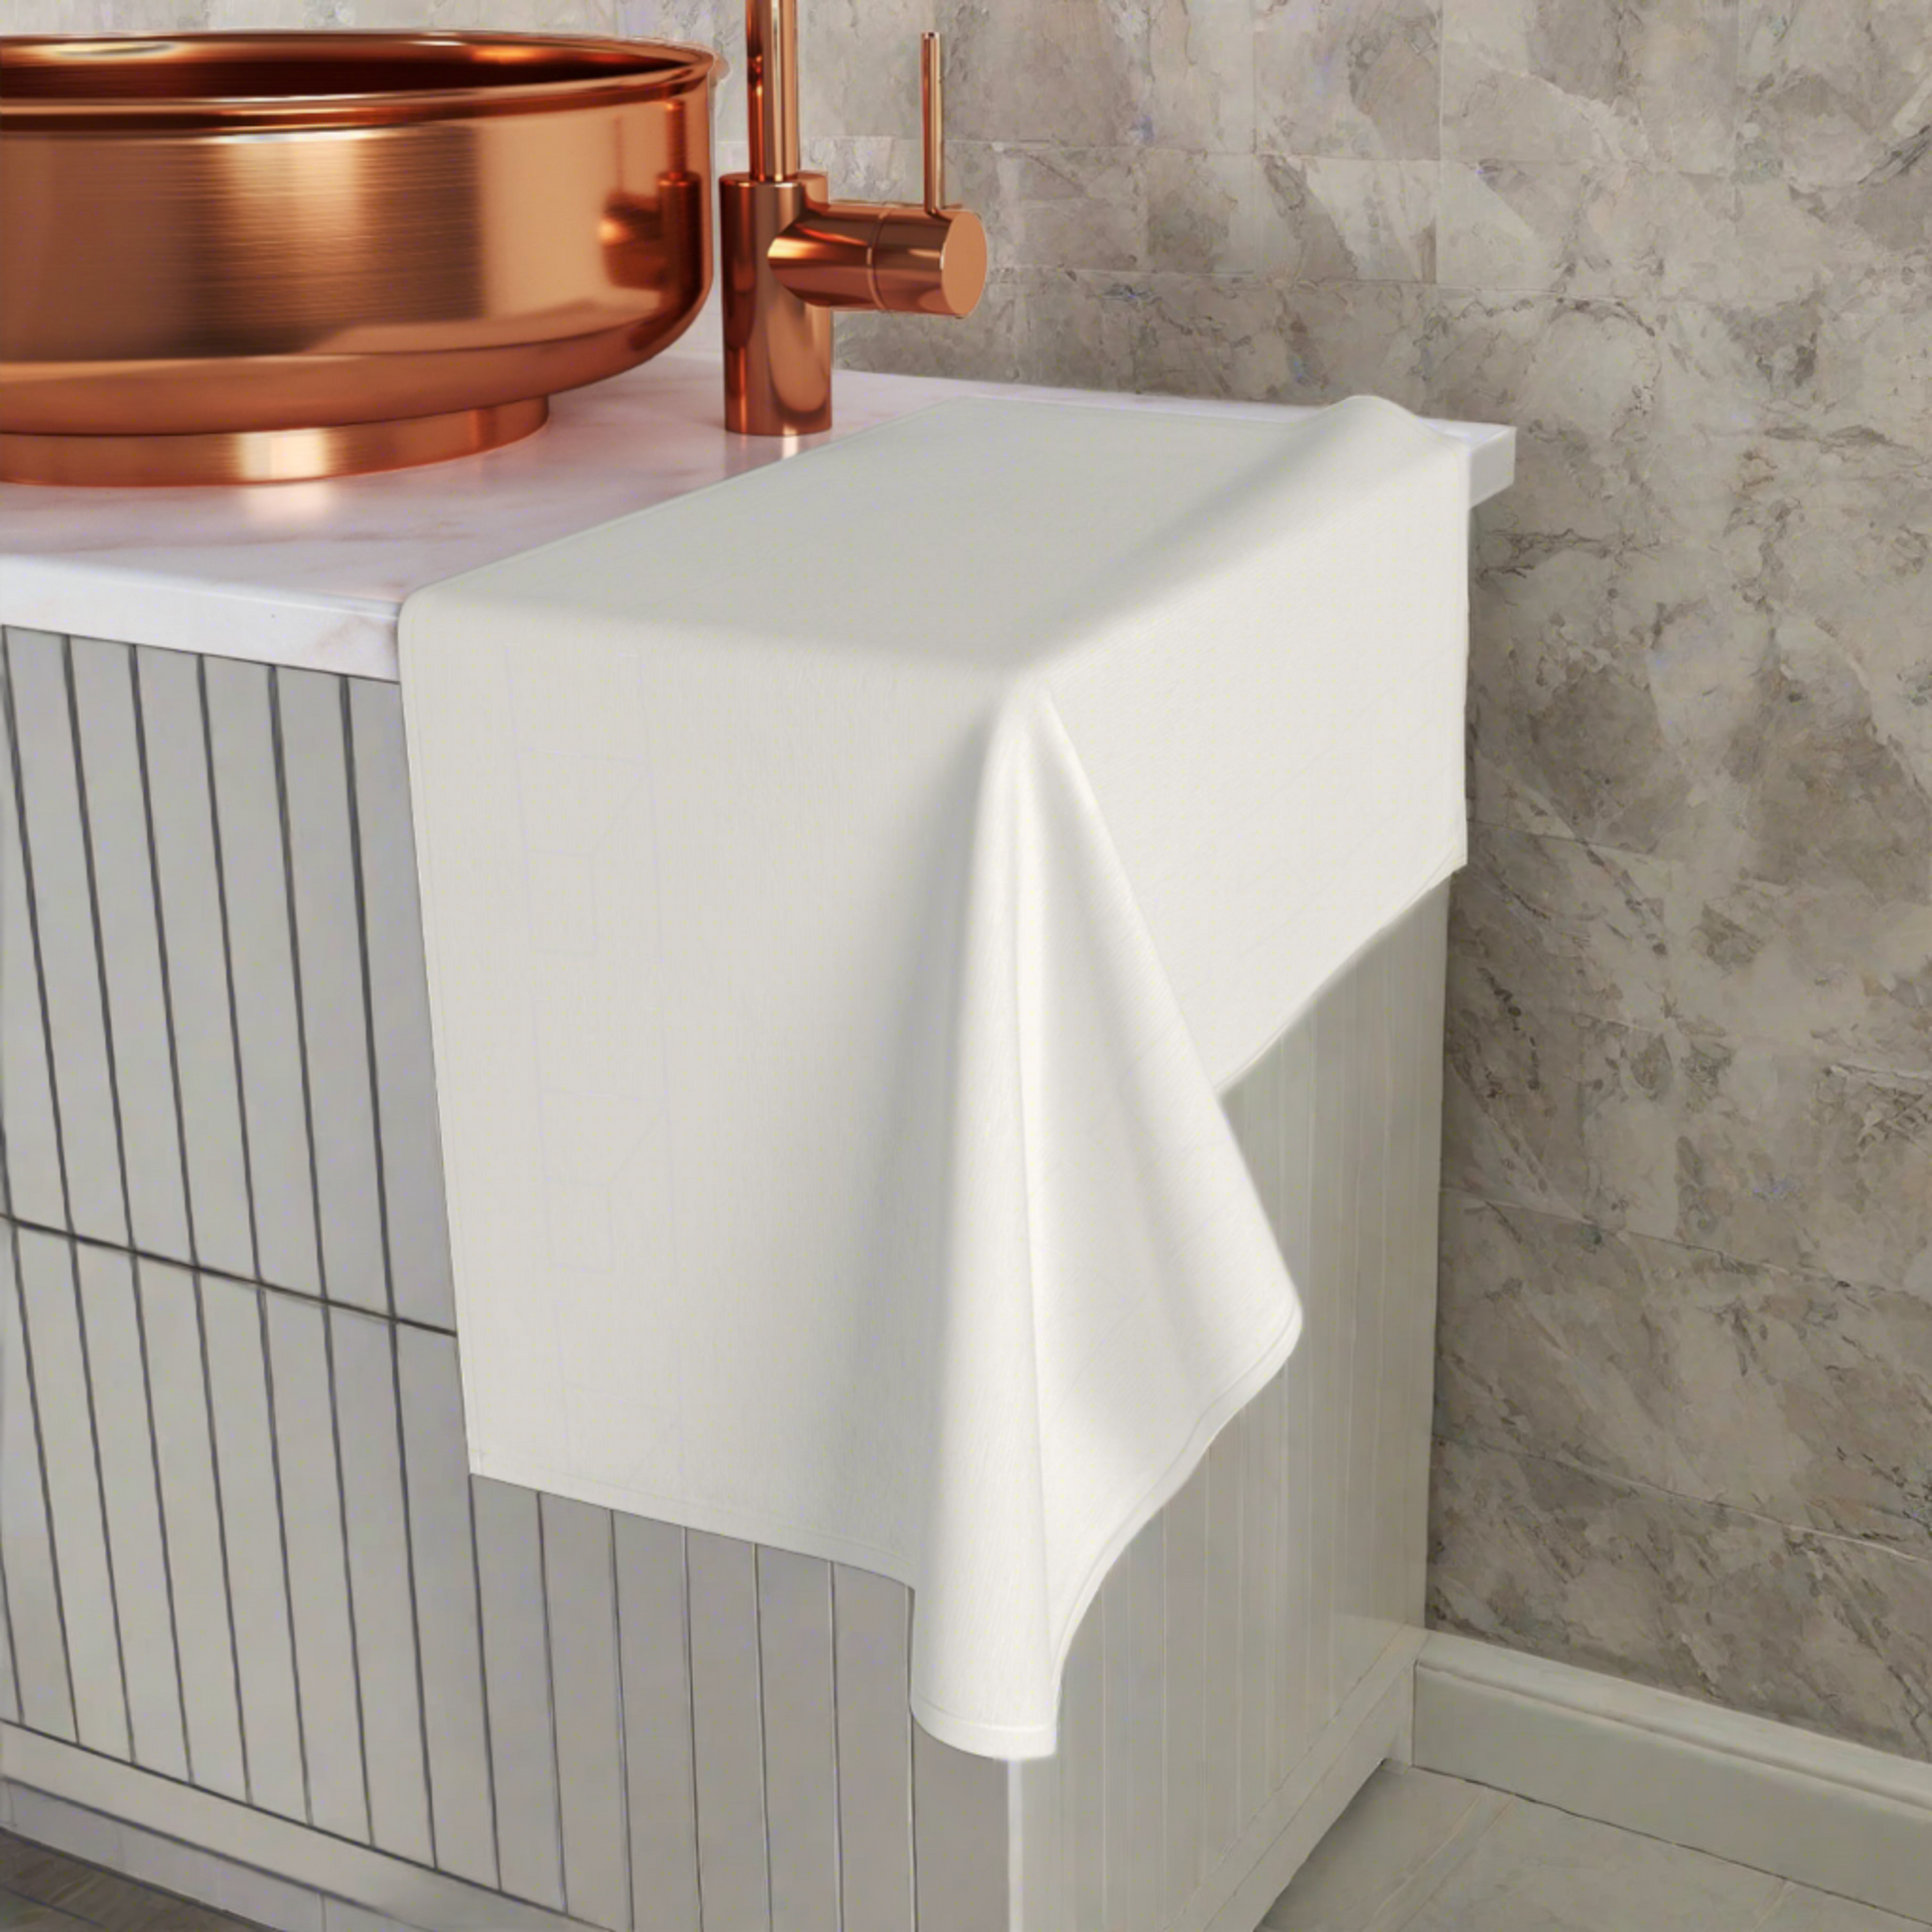 Bone White hand towel positioned over the square counter edge: